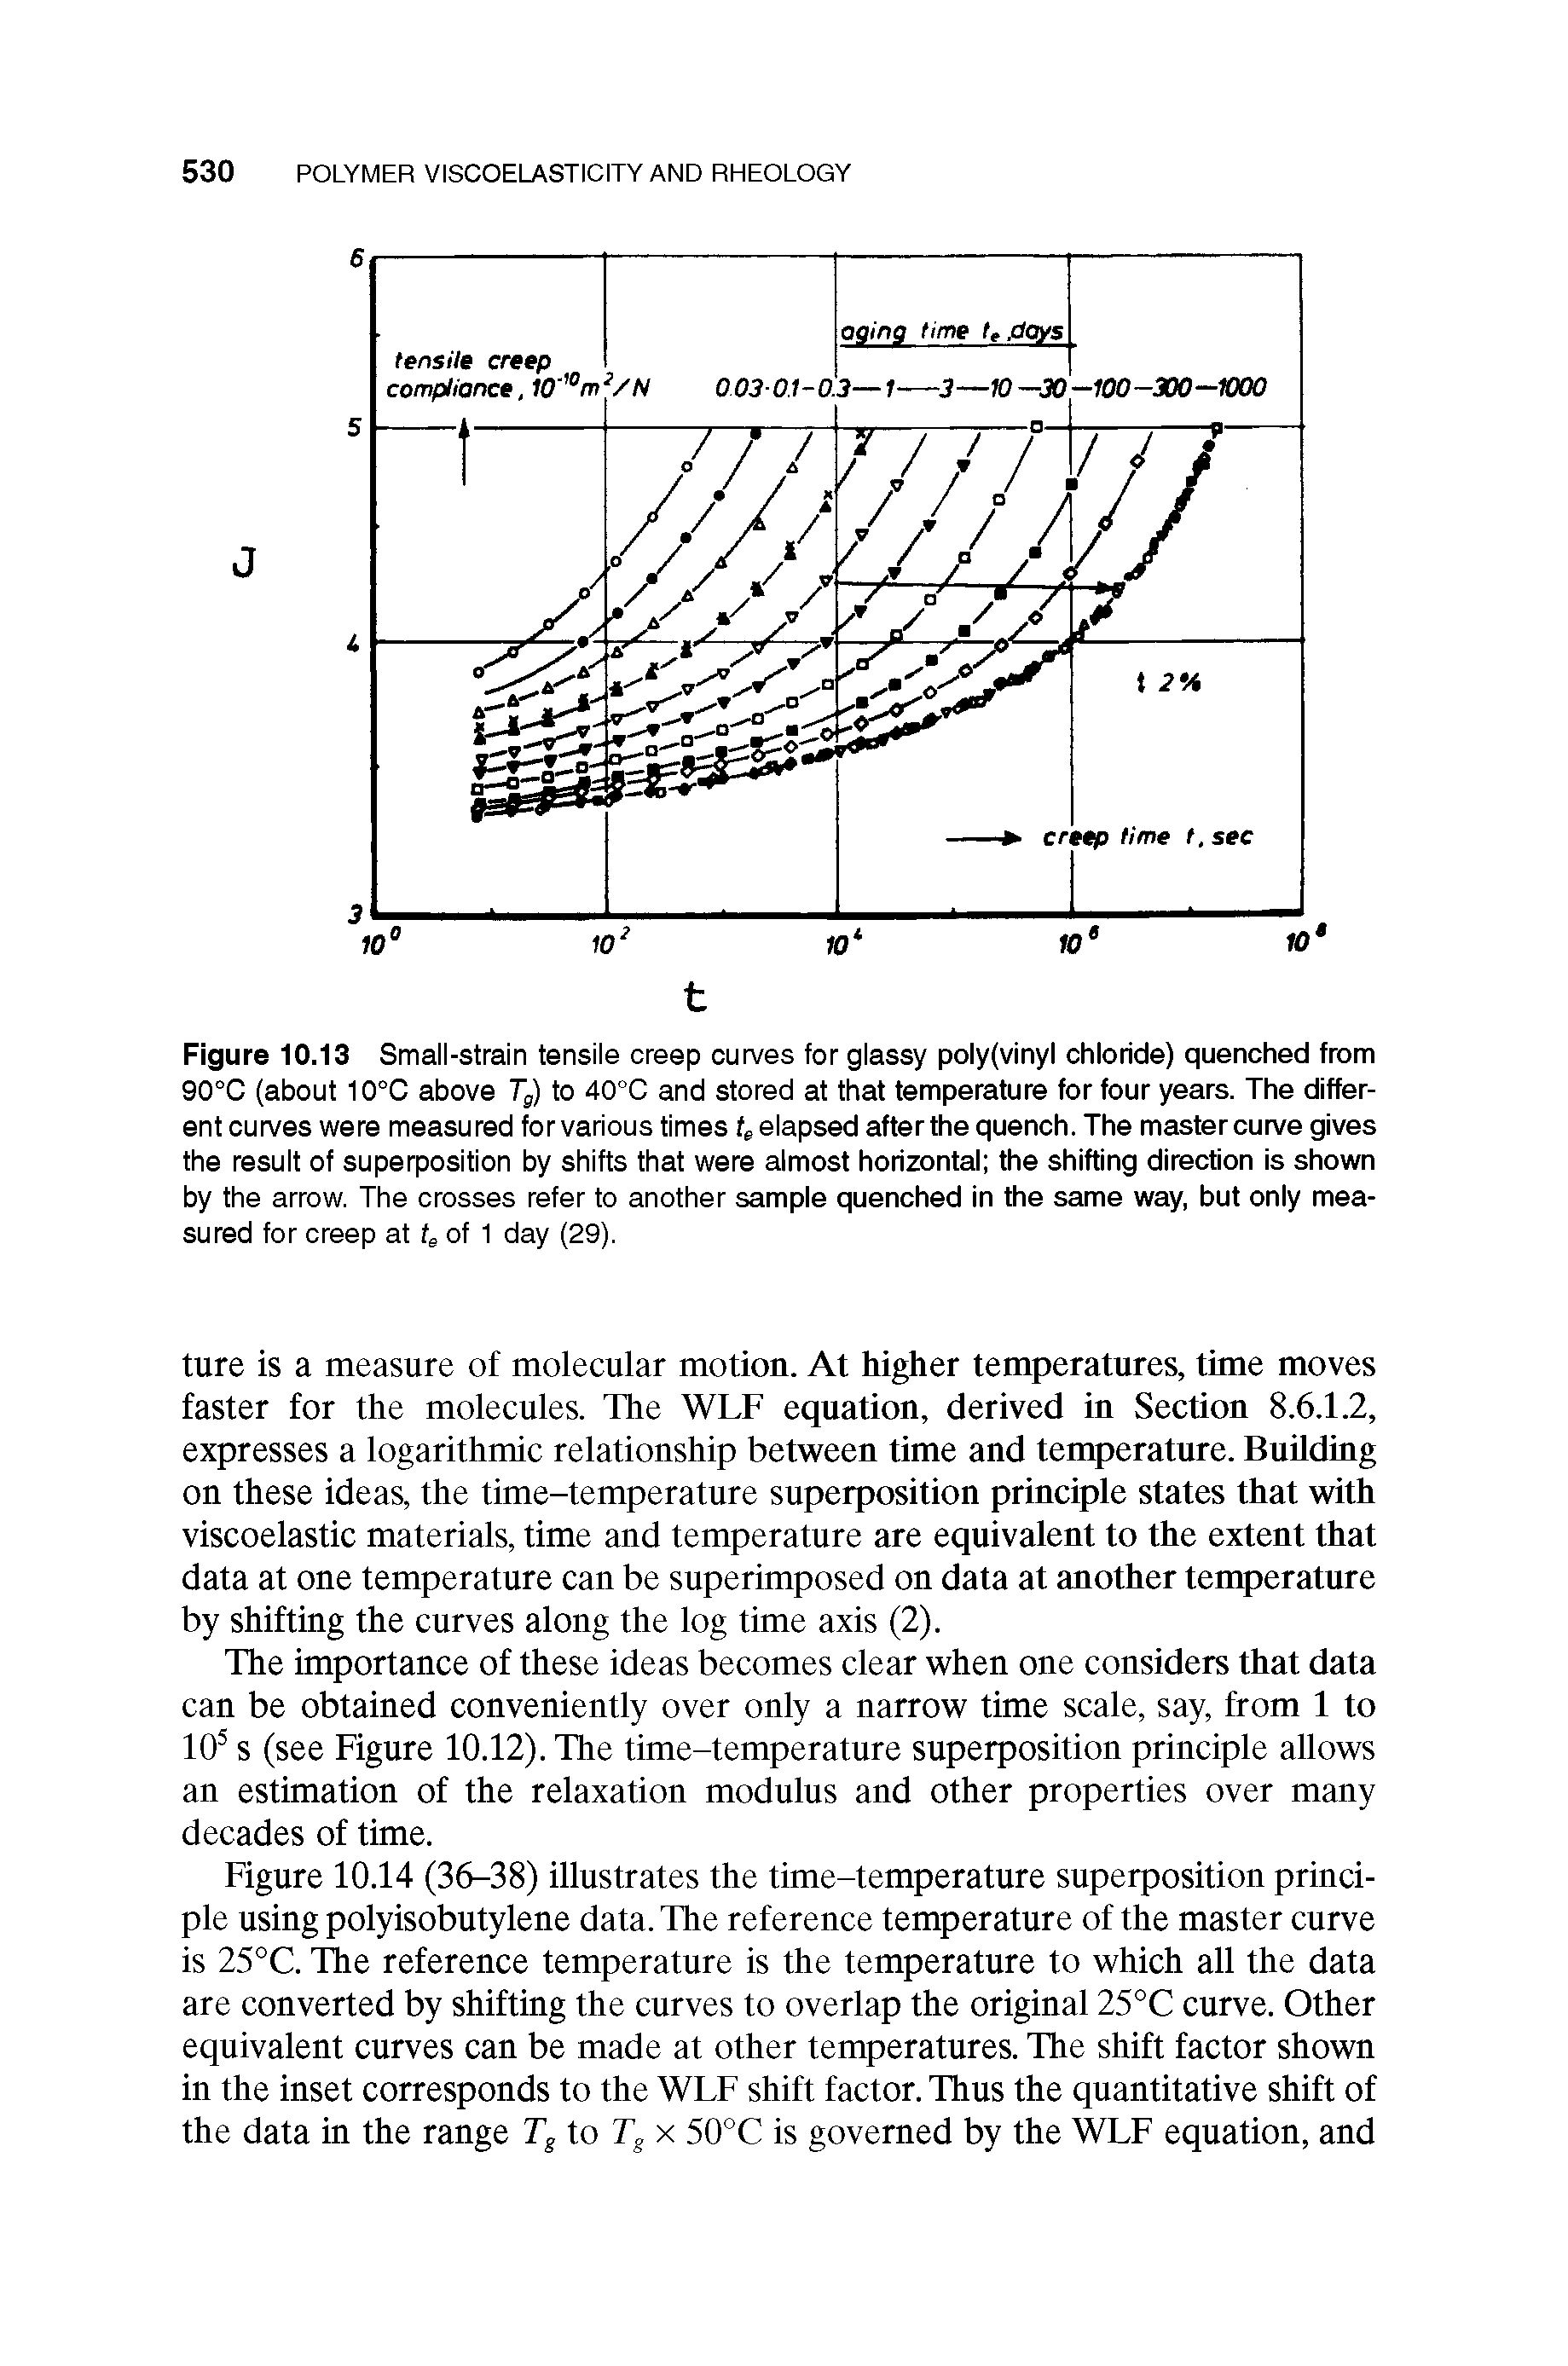 Figure 10.13 Small-strain tensile creep curves for glassy poly(vinyl chloride) quenched from 90°C (about 10°C above to 40°C and stored at that temperature for four years. The different curves were measured for various times t, elapsed after the quench. The master cunre gives the result of superposition by shifts that were almost horizontal the shifting direction is shown by the arrow. The crosses refer to another sample quenched in the same way, but only measured for creep at of 1 day (29).